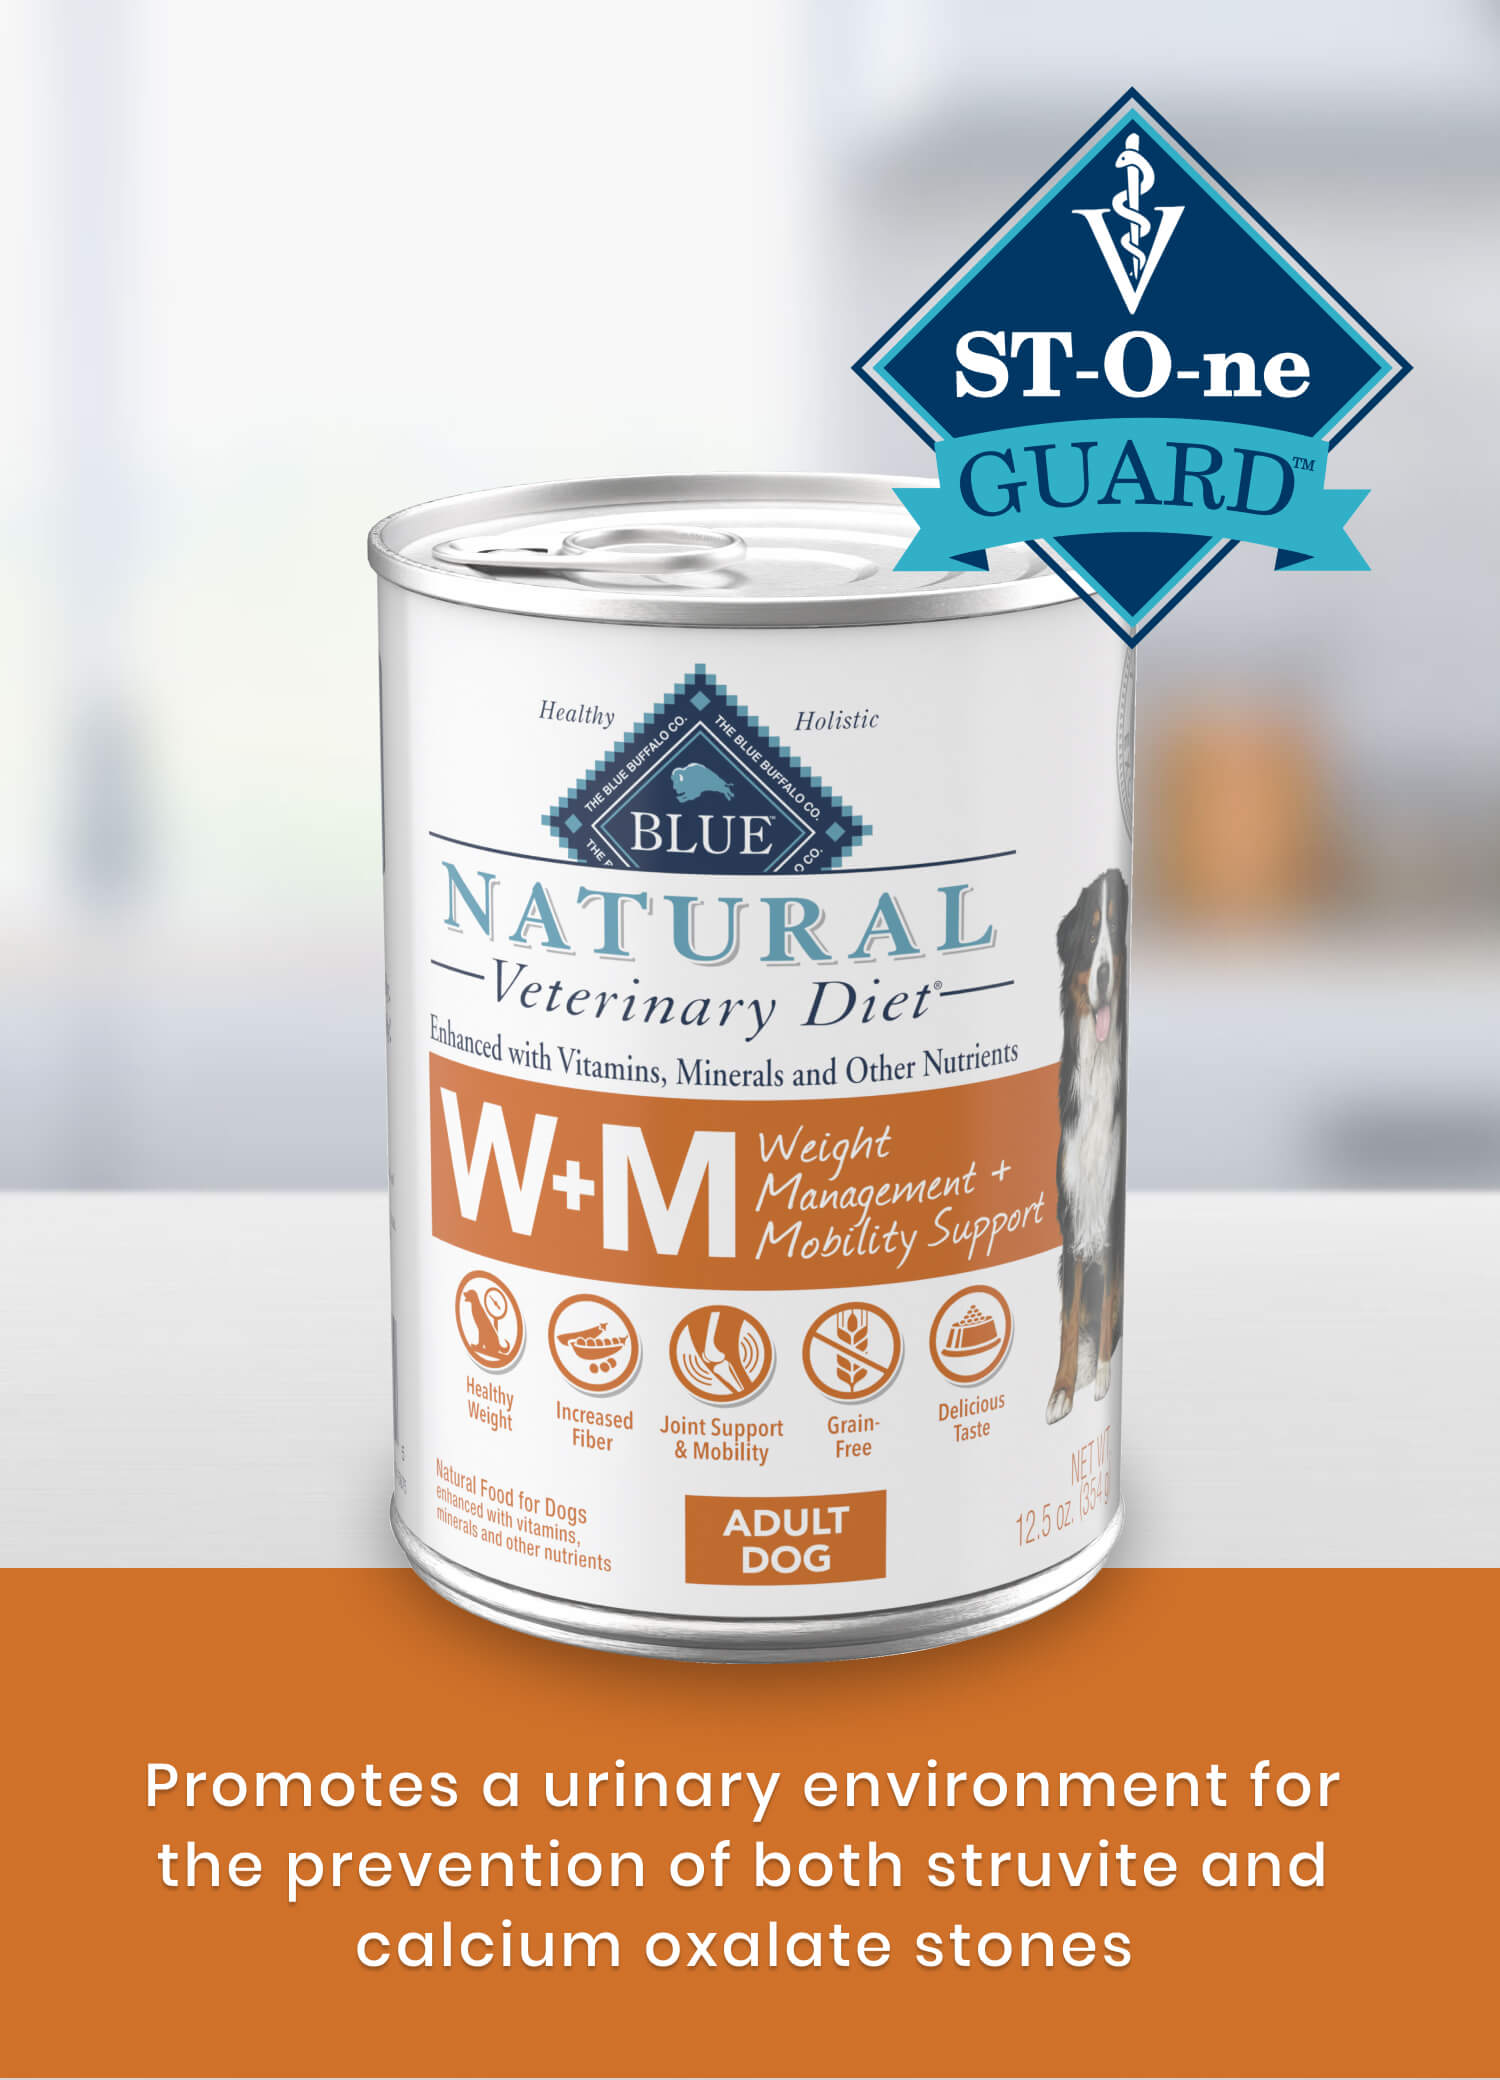 W+M Weight Management + Mobility Support Promotes a urinary environment for the prevention of both struvite and calcium oxalate stones